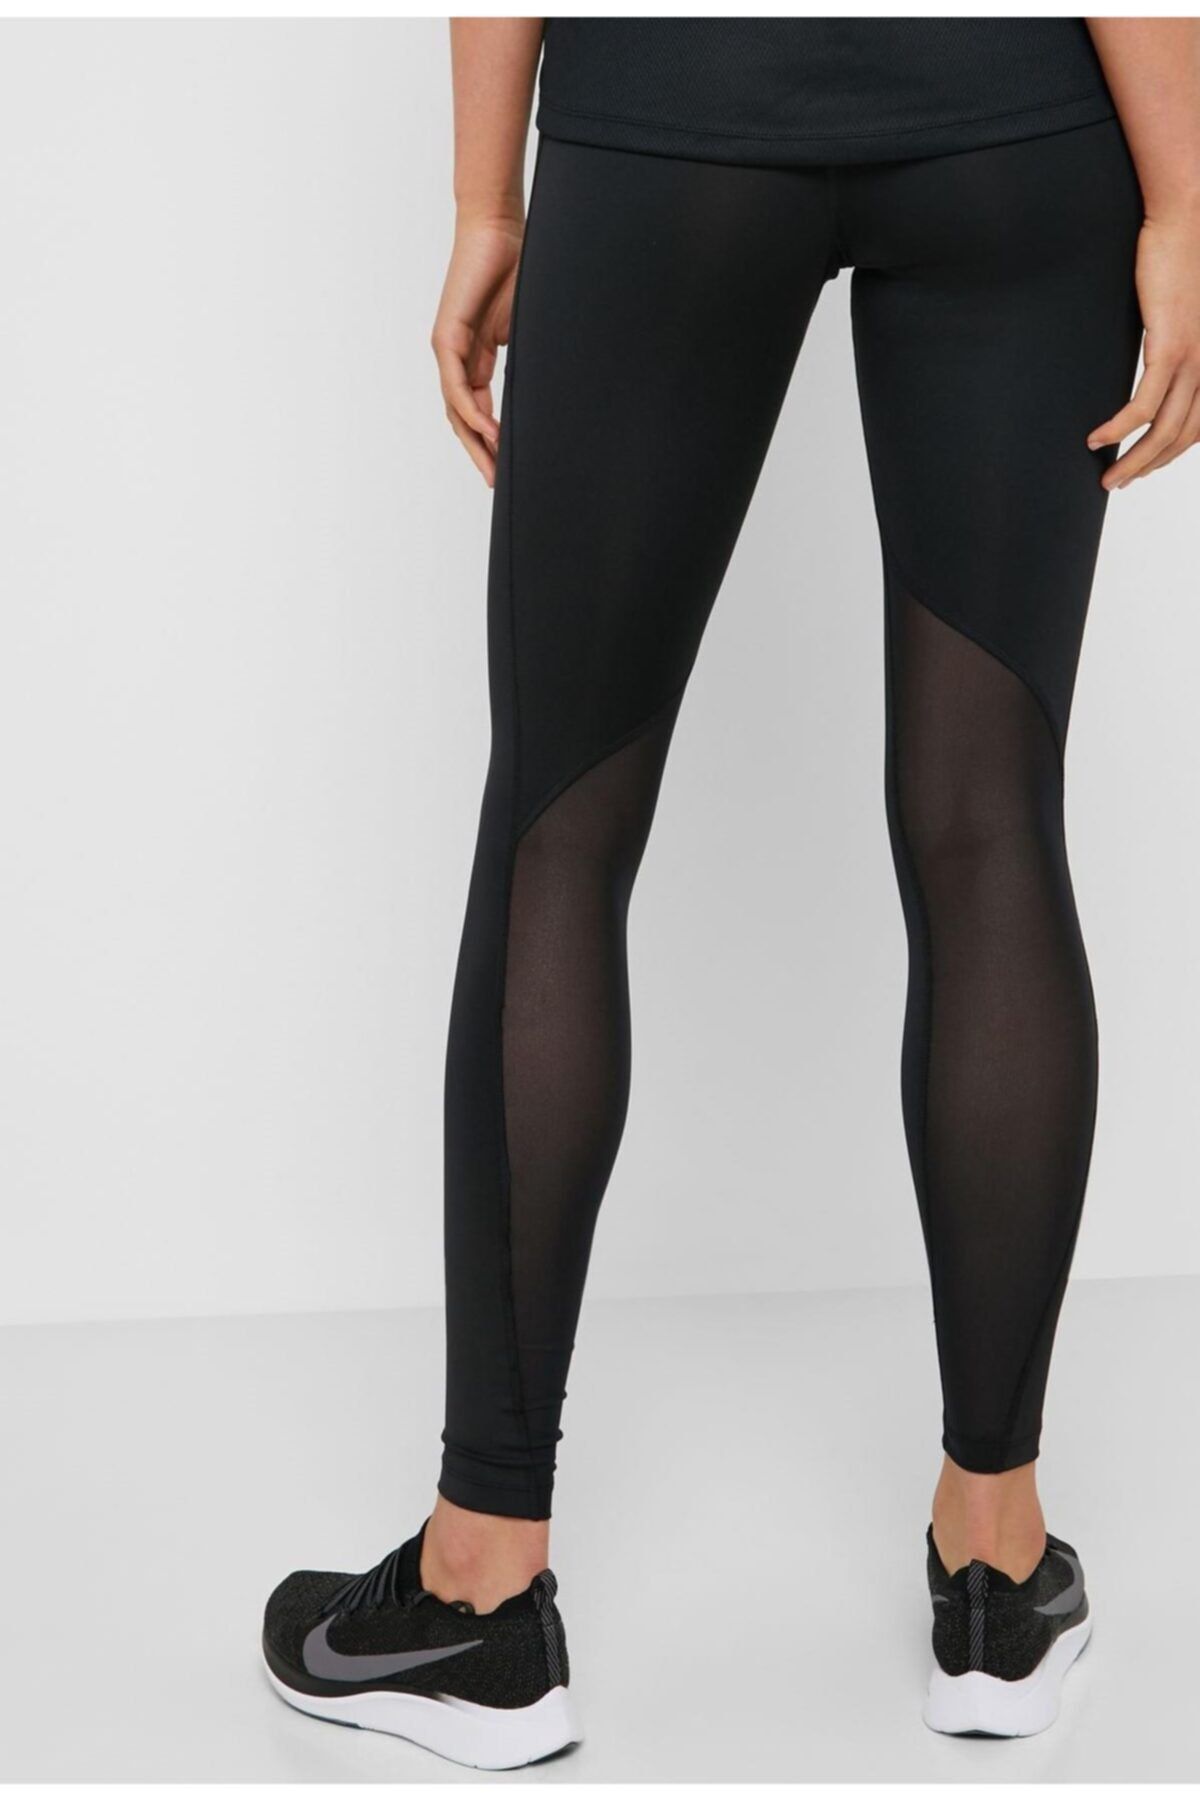 Nike Running Fast Tight Black Women's Tights with Plenty of Pockets